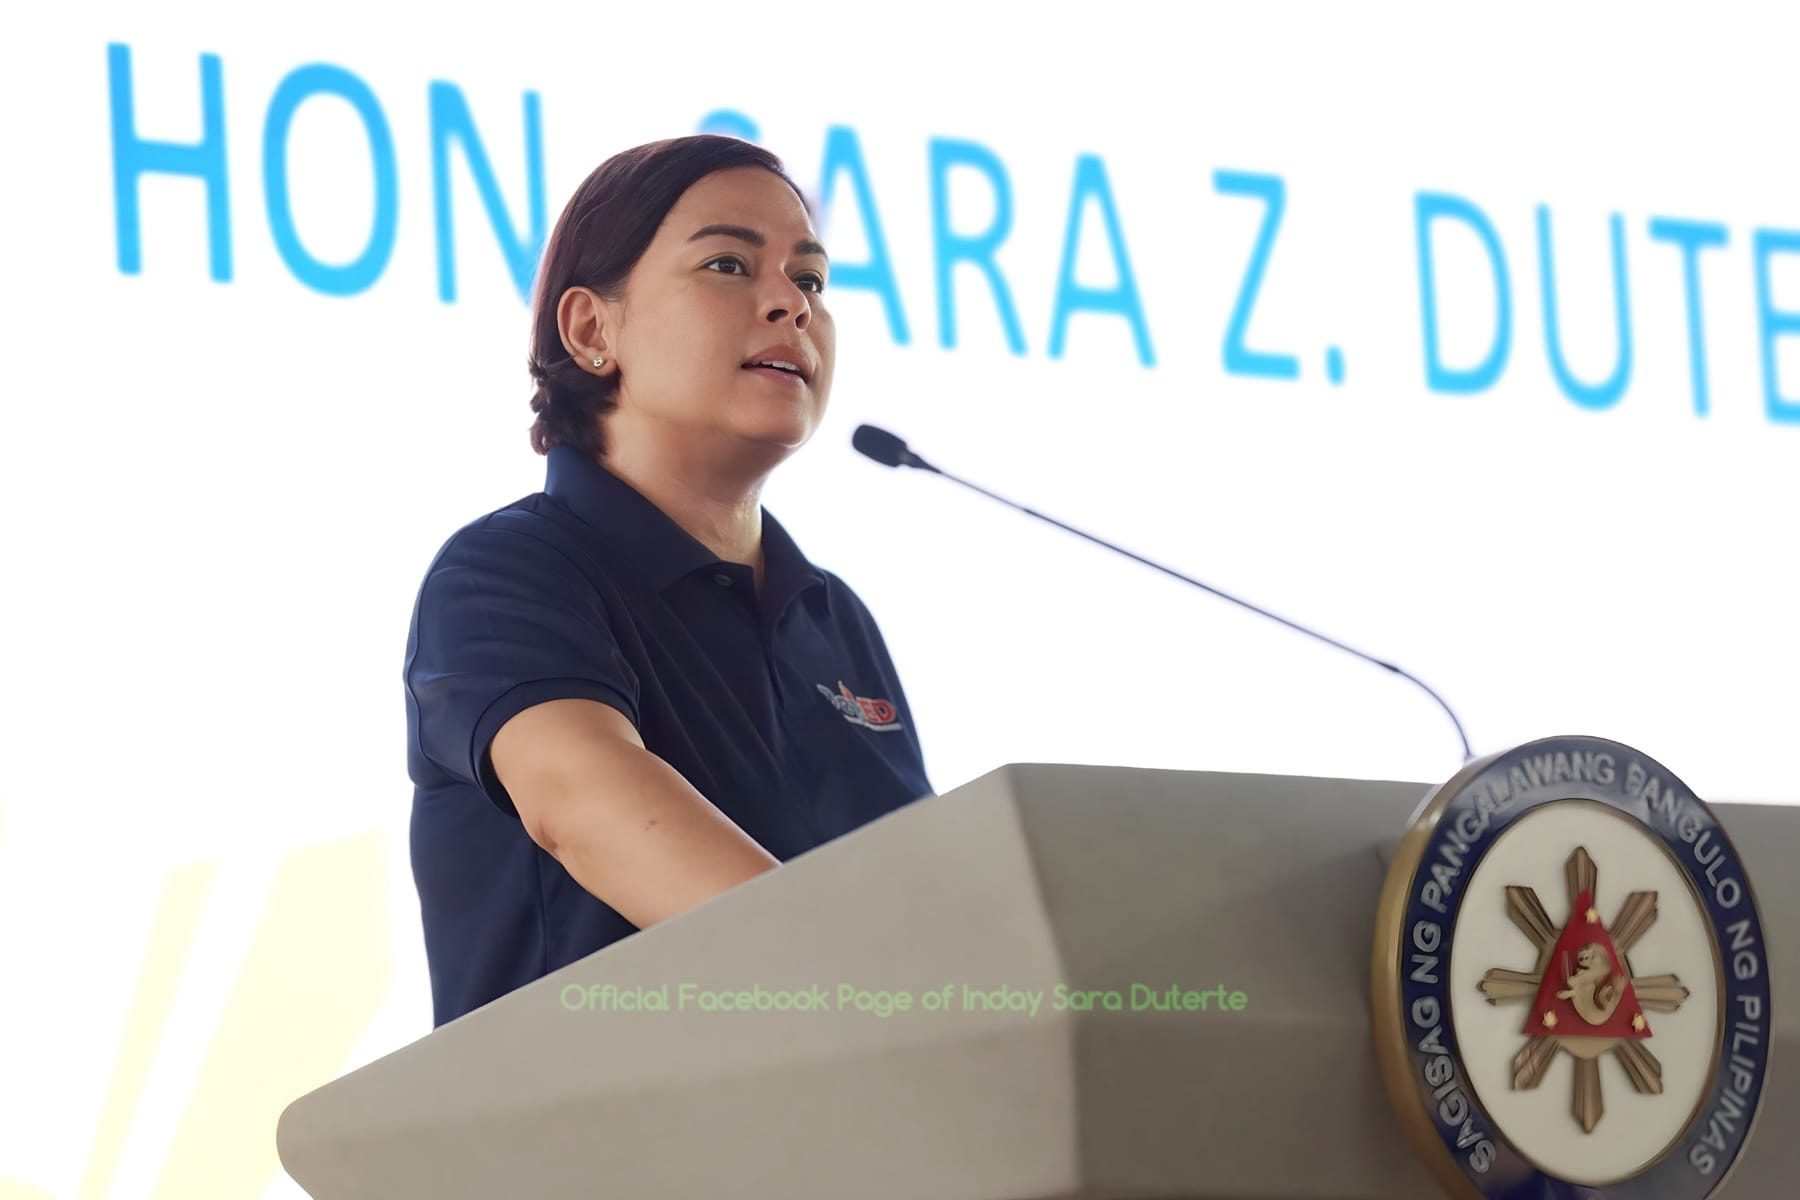 ‘Let’s safeguard the Constitution’: Sara Duterte slams ‘vote-buying’ for charter change